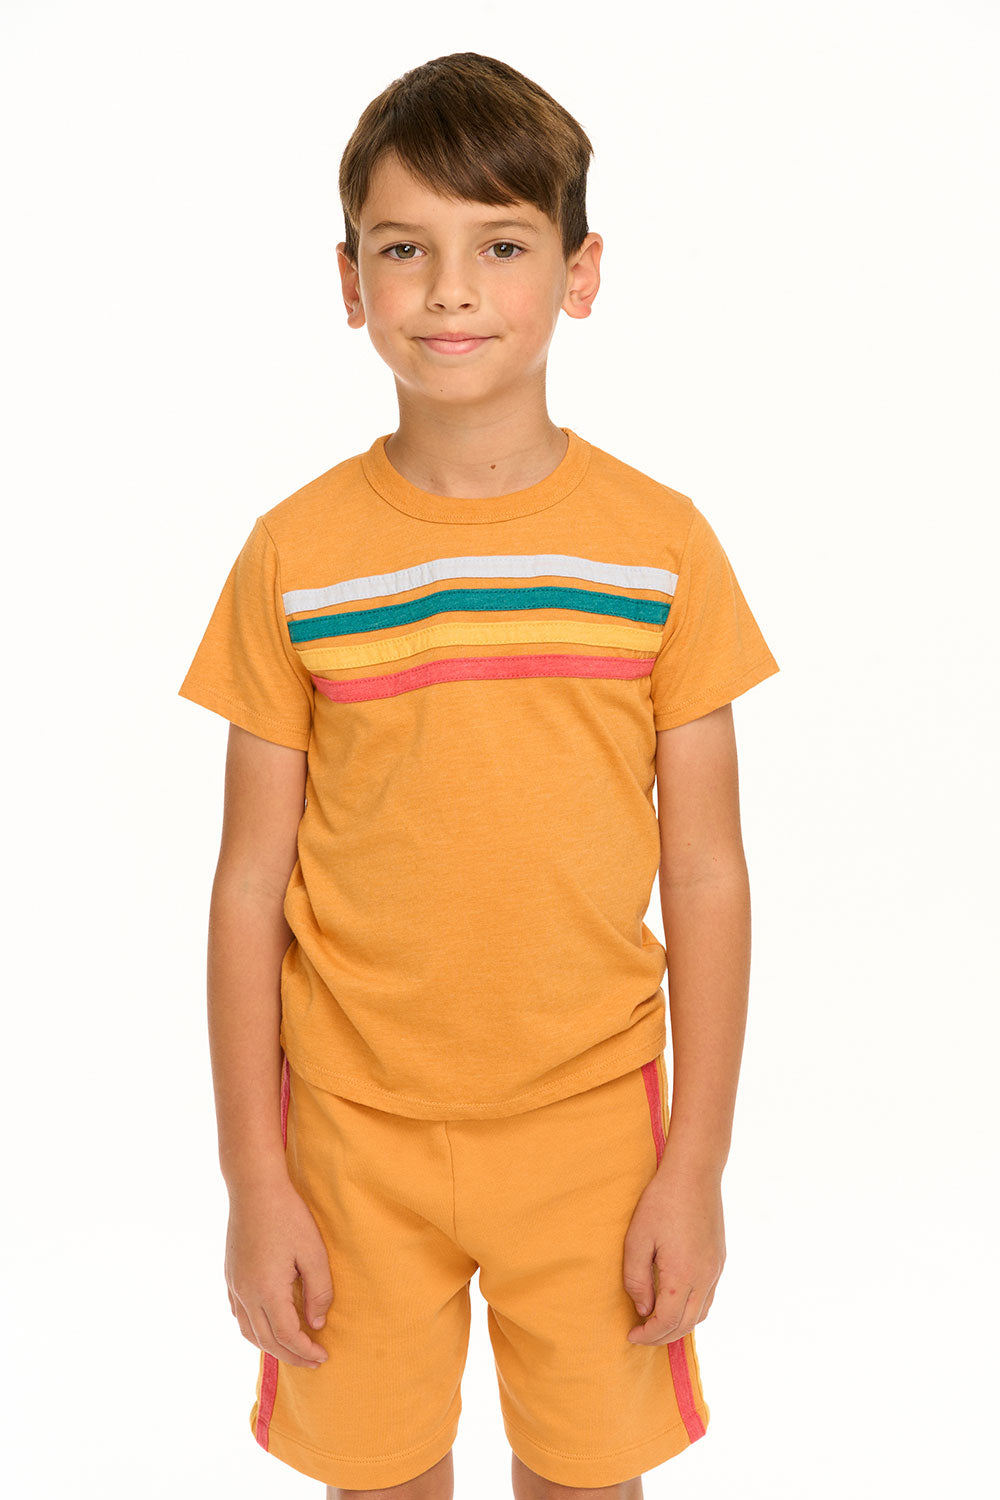 Chaser Boy's Recycled Vintage Jersey Socal Stripe Tee